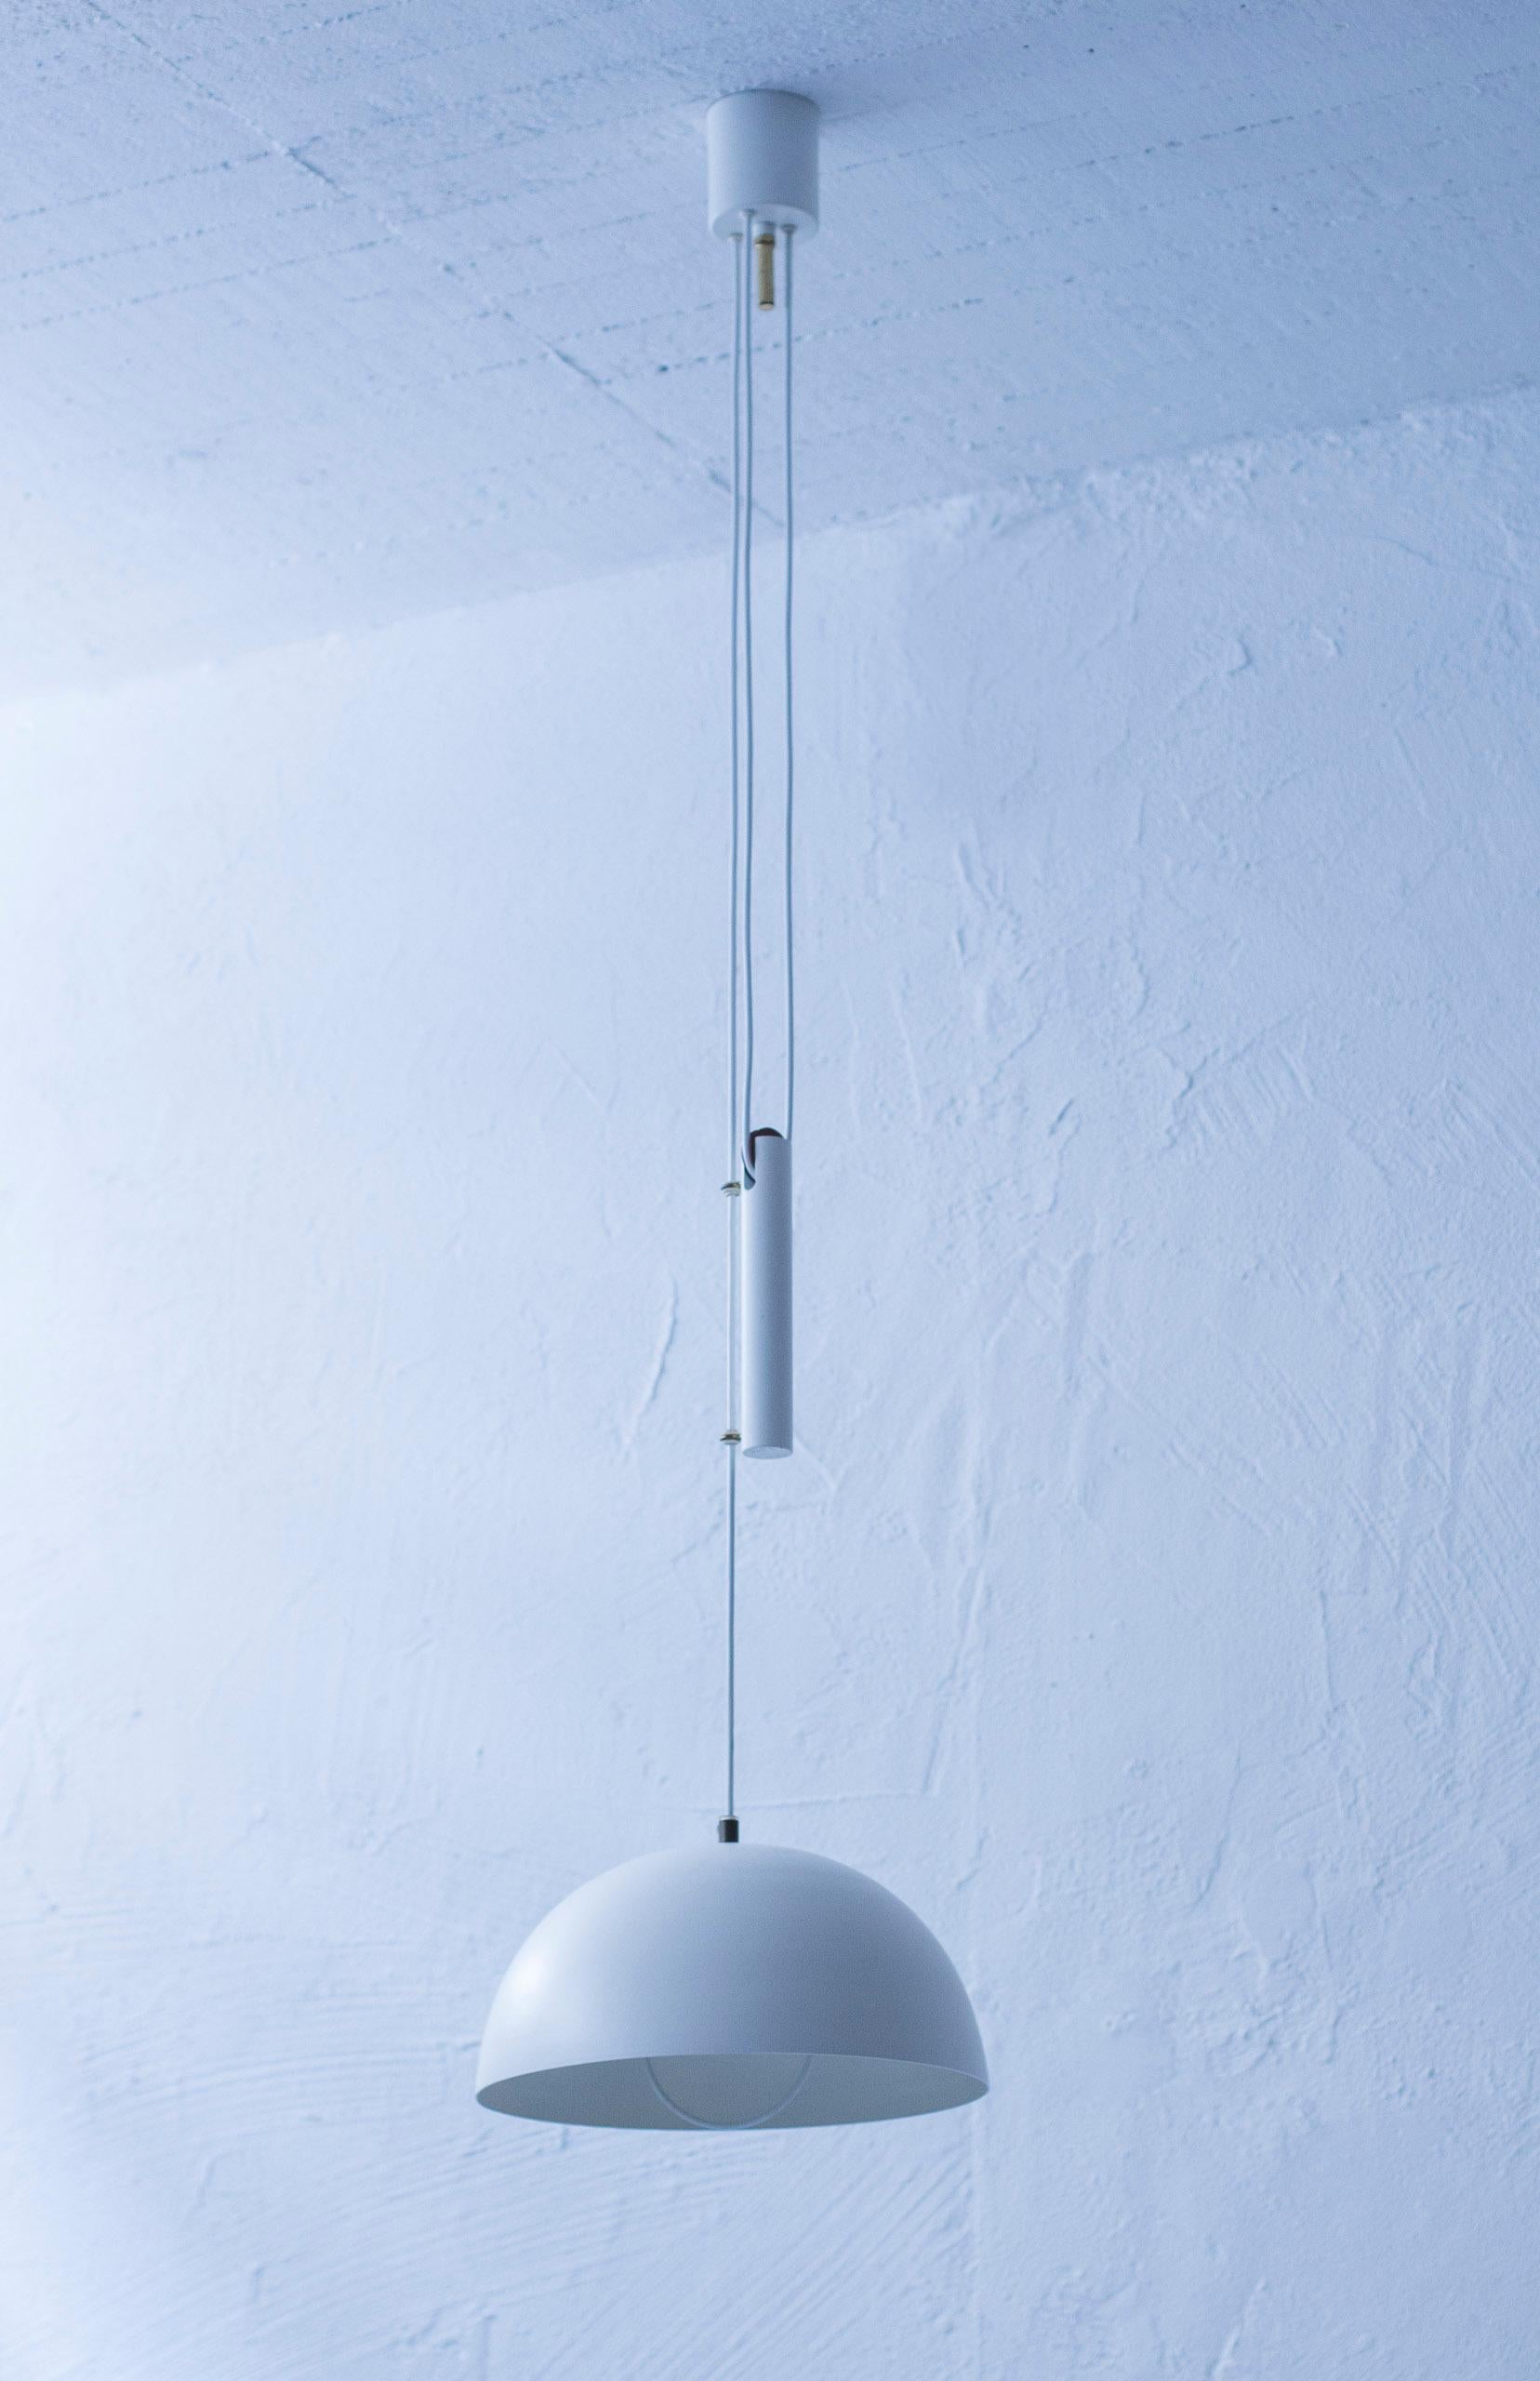 Aluminum Pendant Lamps Attributed to Hans-Agne Jakobsson, Karlskron Lampfabrik, 1950s For Sale